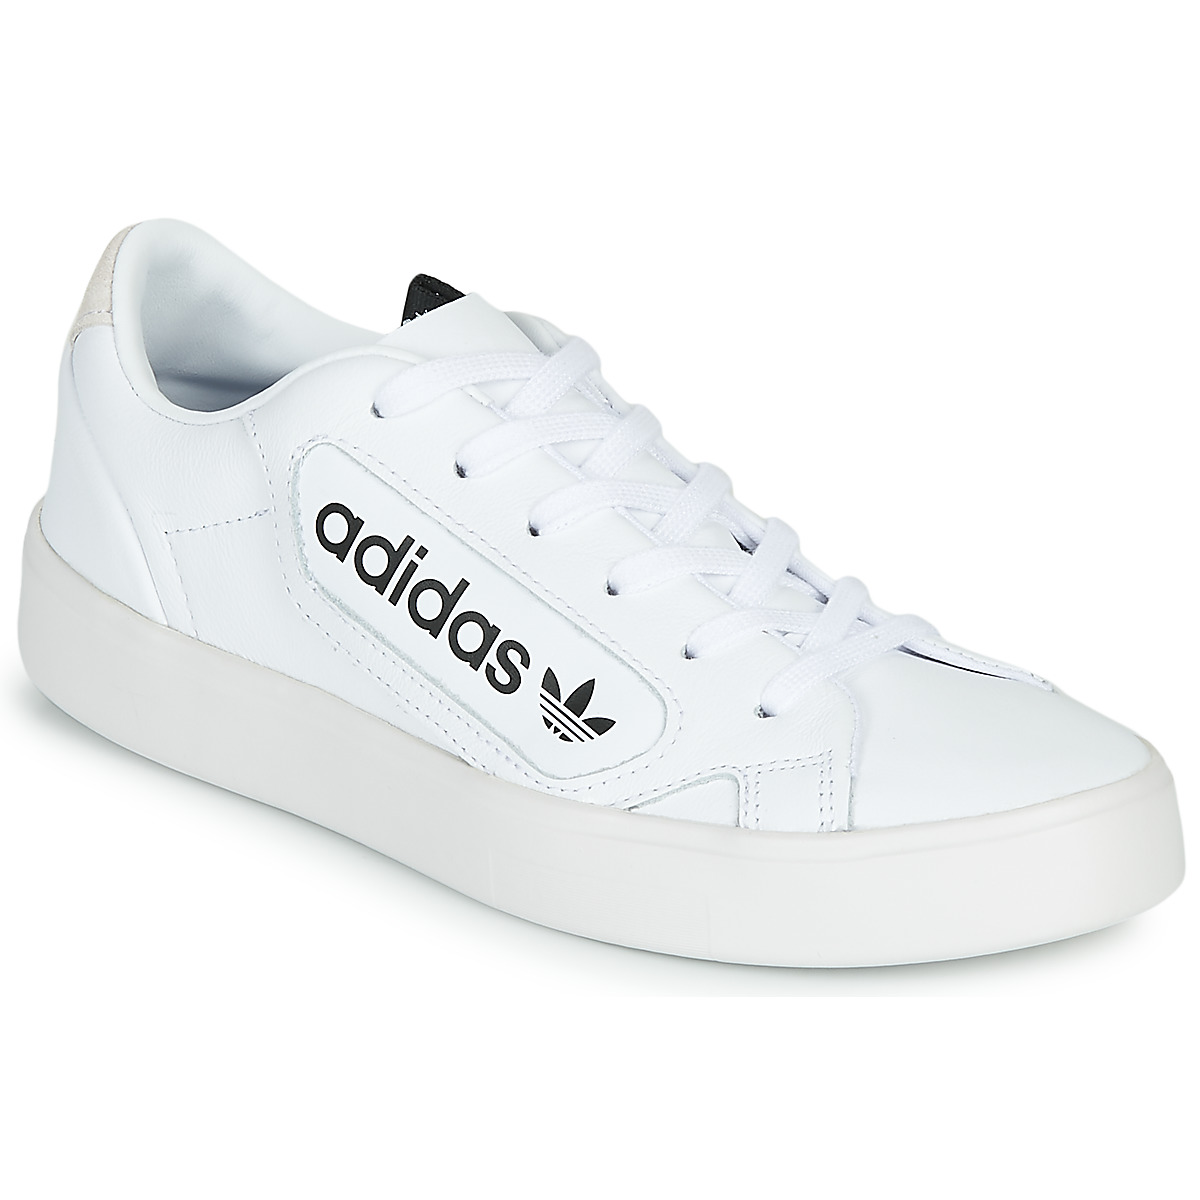 Women SLEEK - - top adidas adidas Spartoo UK delivery Free Originals ! trainers | £ White Low Shoes W